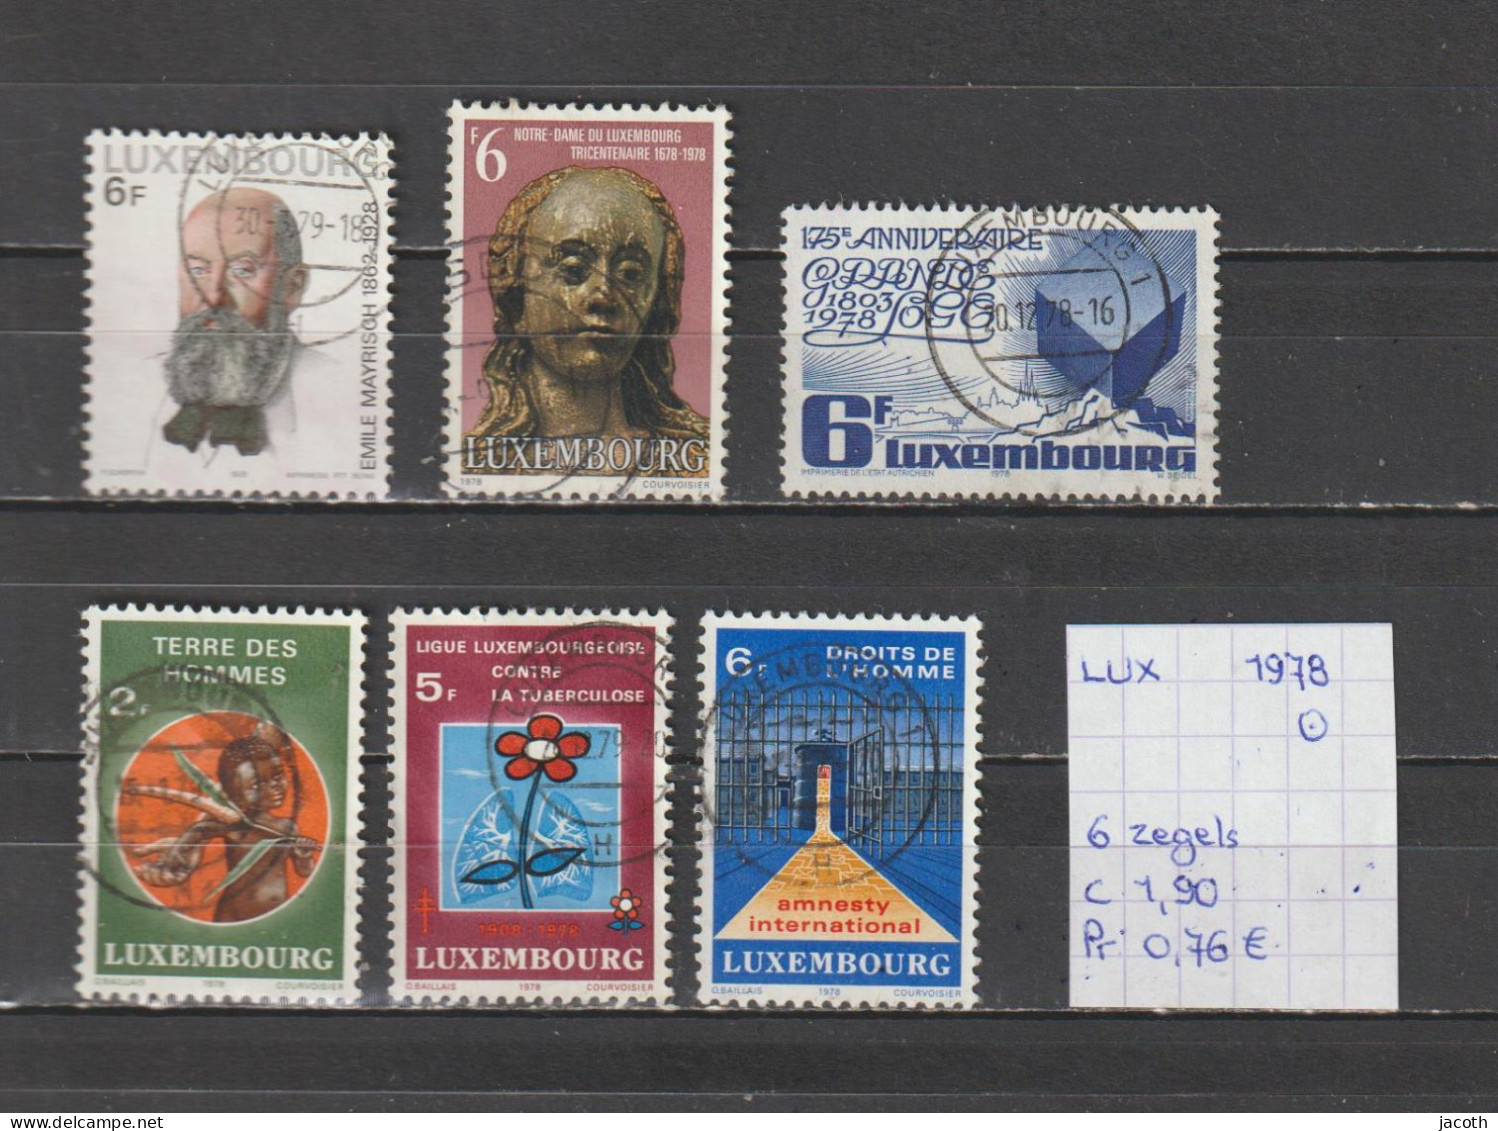 (TJ) Luxembourg 1978 - 6 Zegels (gest./obl./used) - Usados